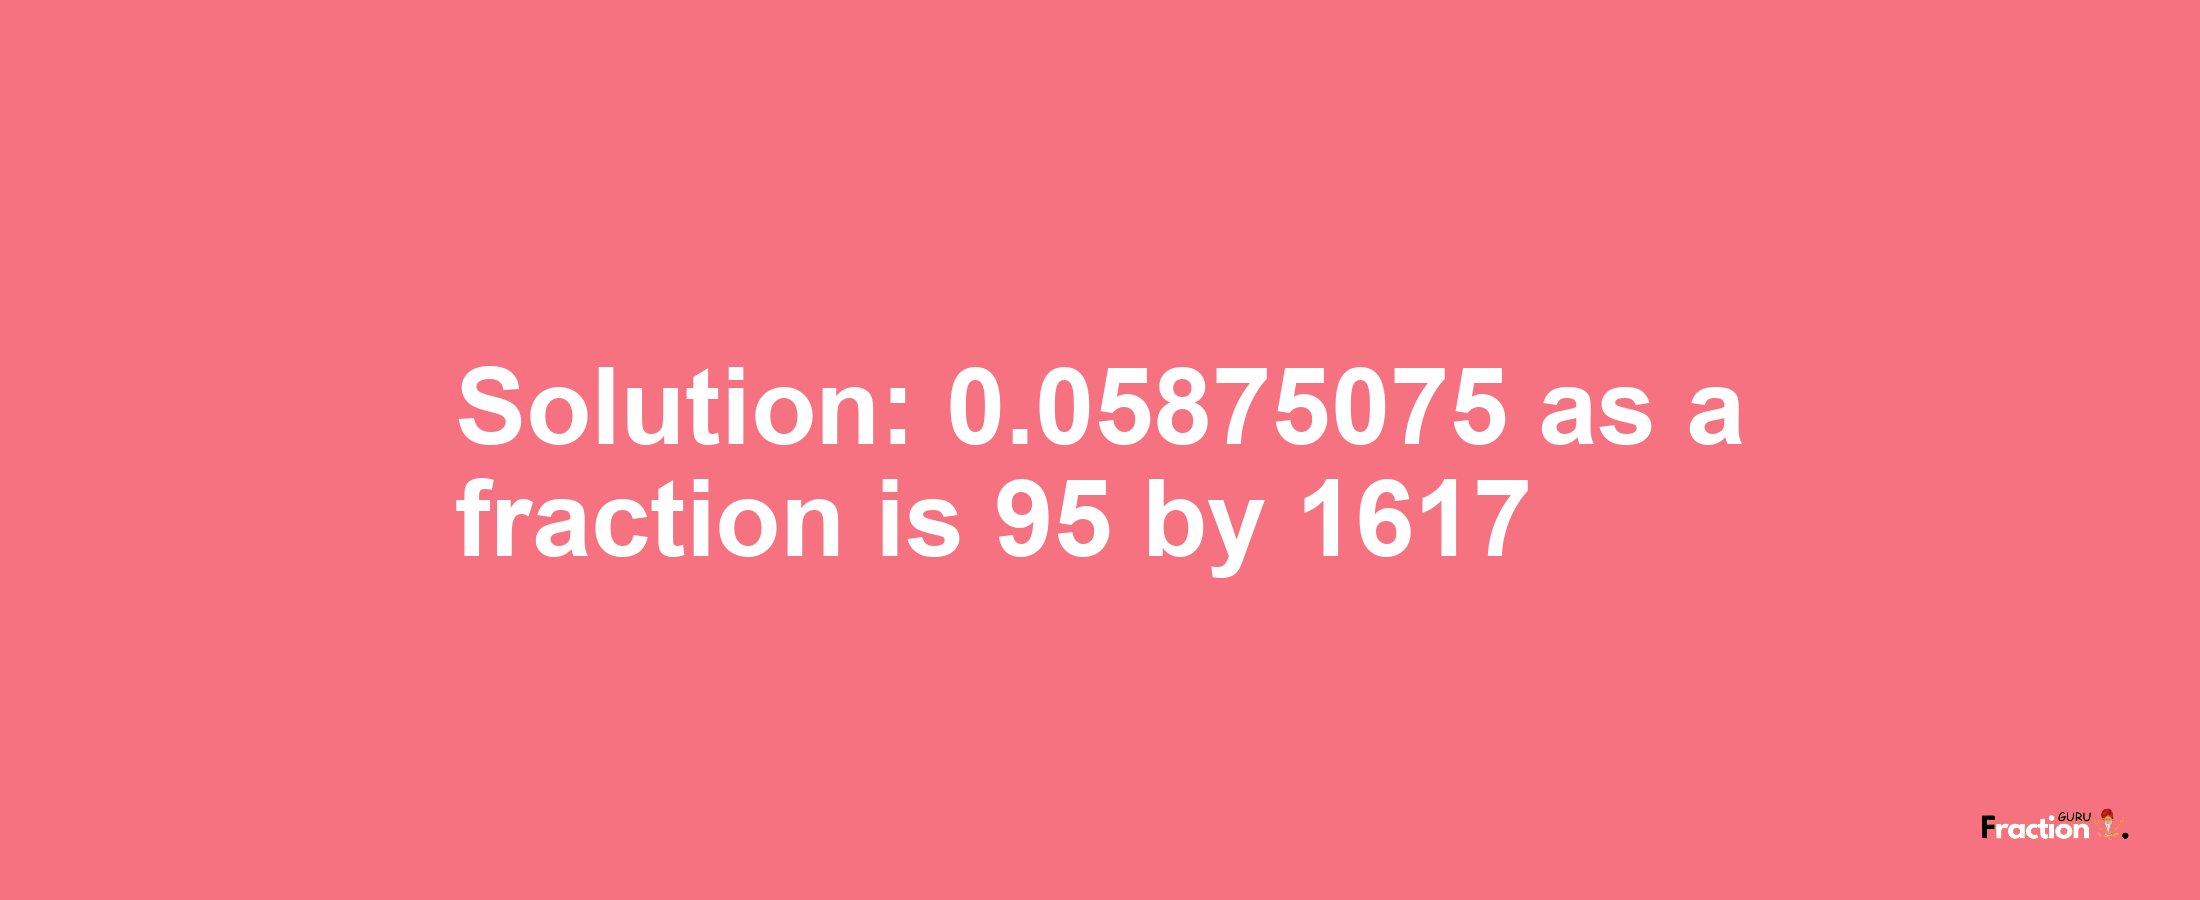 Solution:0.05875075 as a fraction is 95/1617